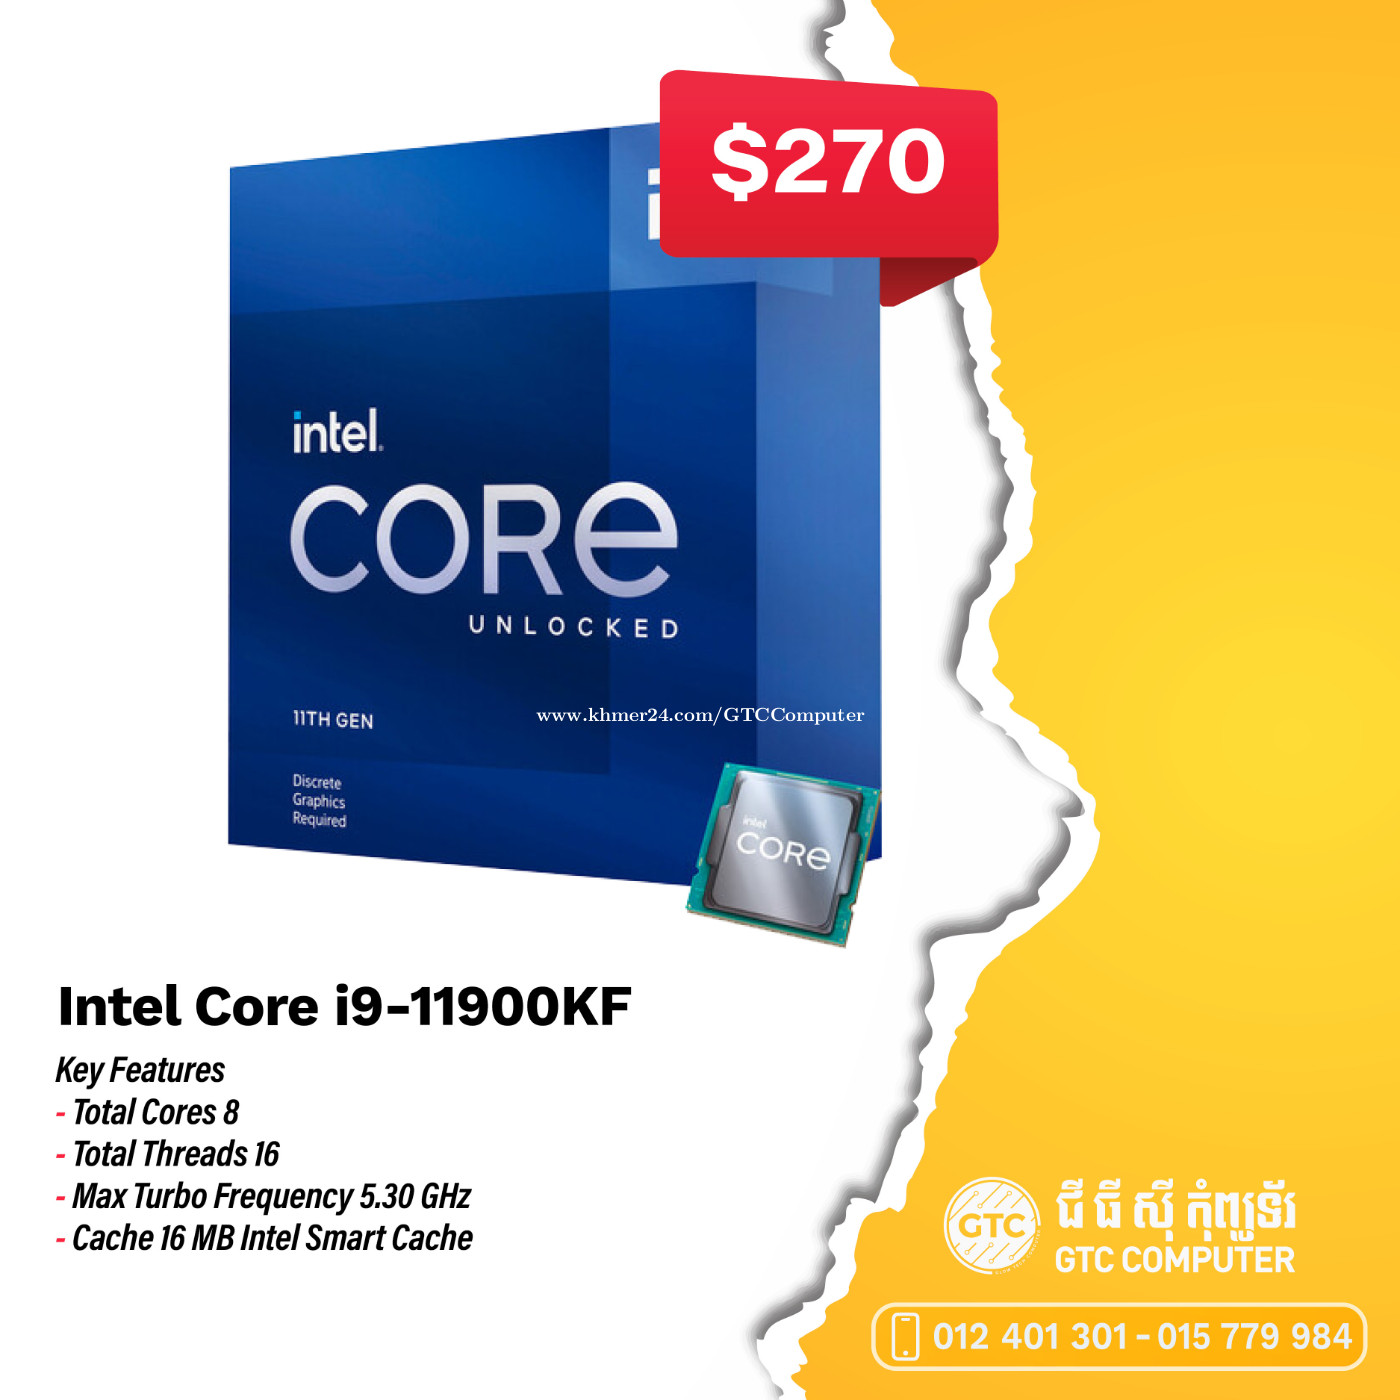 Intel® Core™ i9-11900KF Price $270.00 in Veal Vong, Cambodia - GTC 